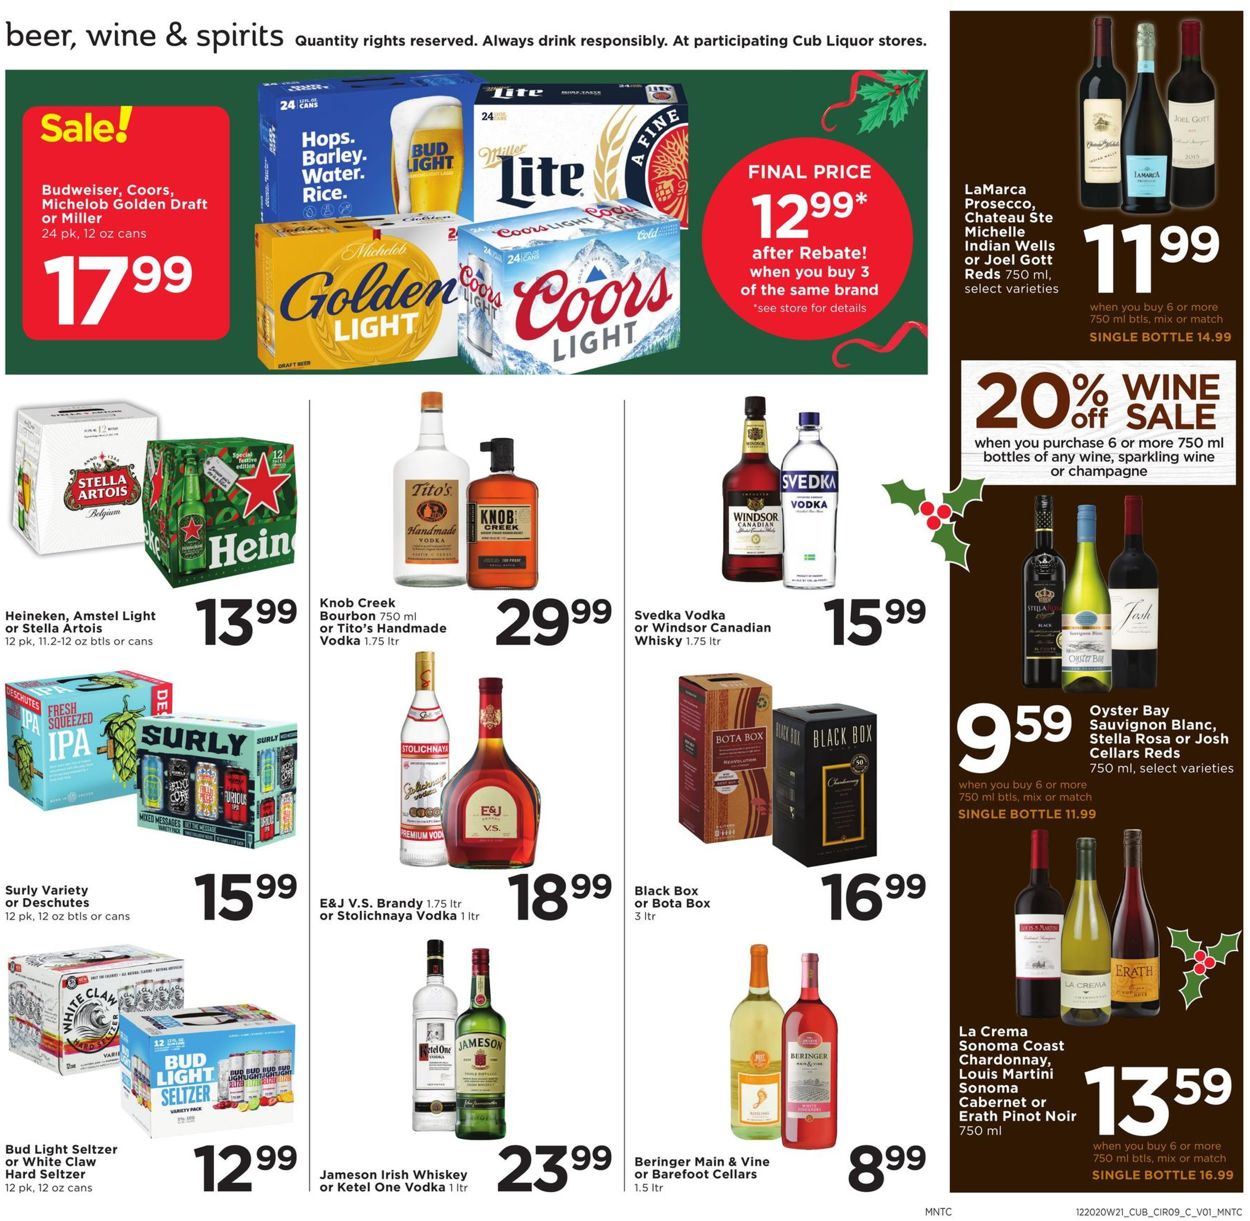 Catalogue Cub Foods Grocery Savings 2020 from 12/20/2020